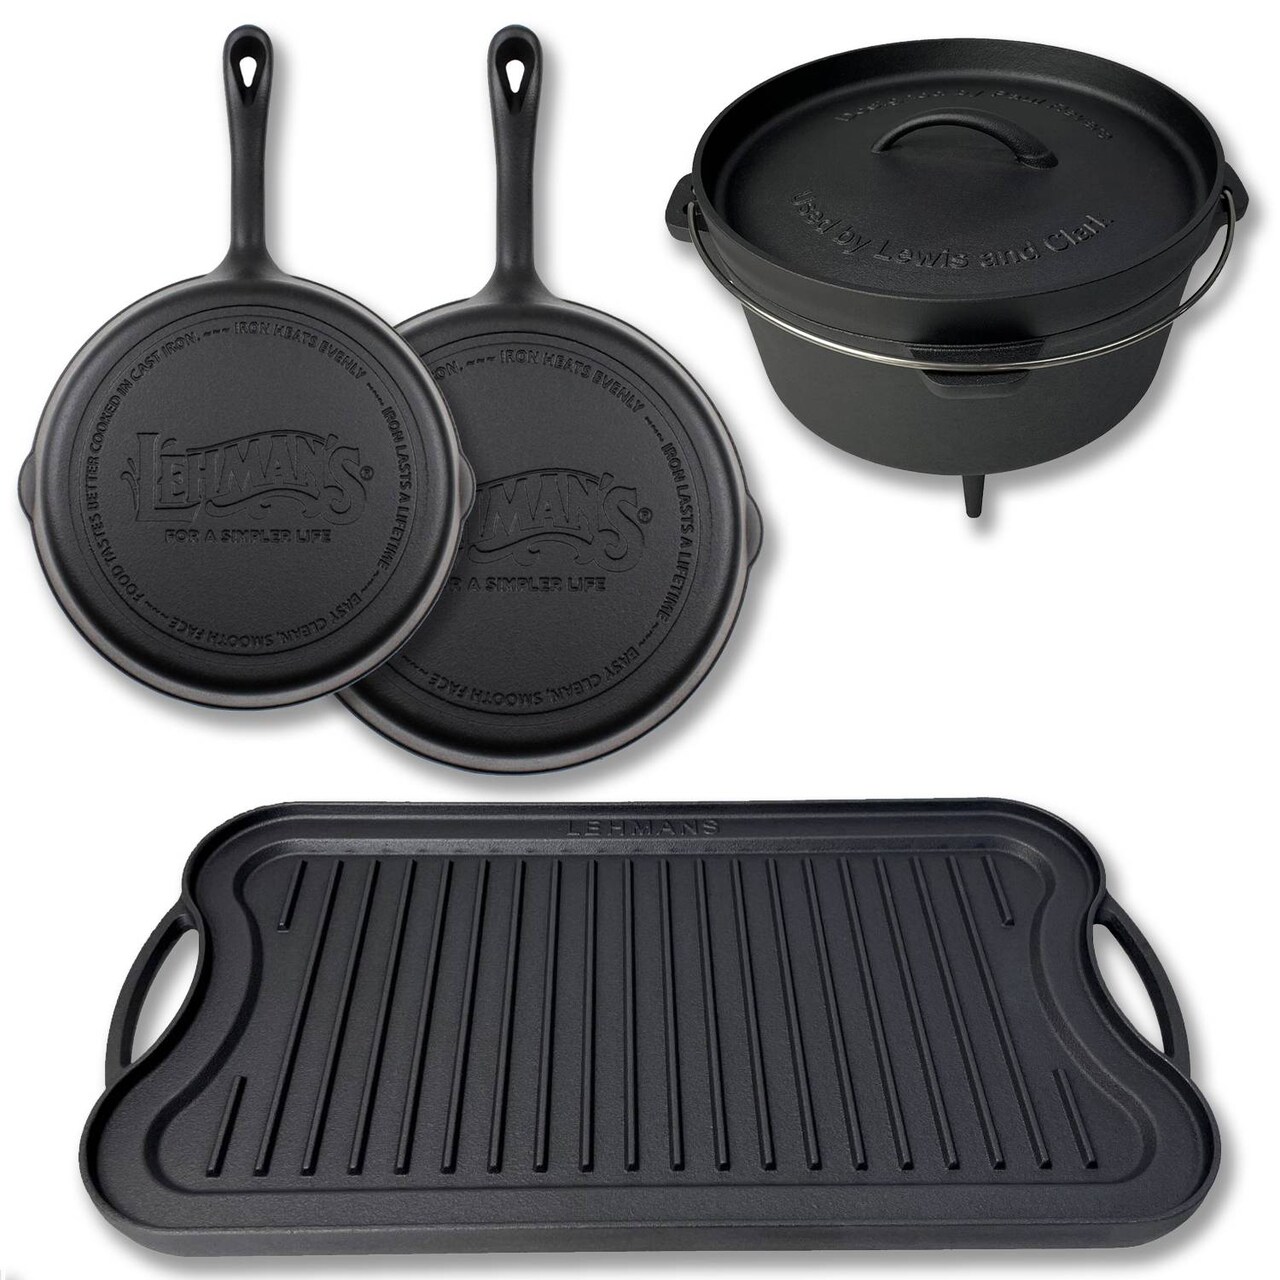 Lehman's Campfire Cooking 4-Piece Set, Nitrided, Dutch Oven